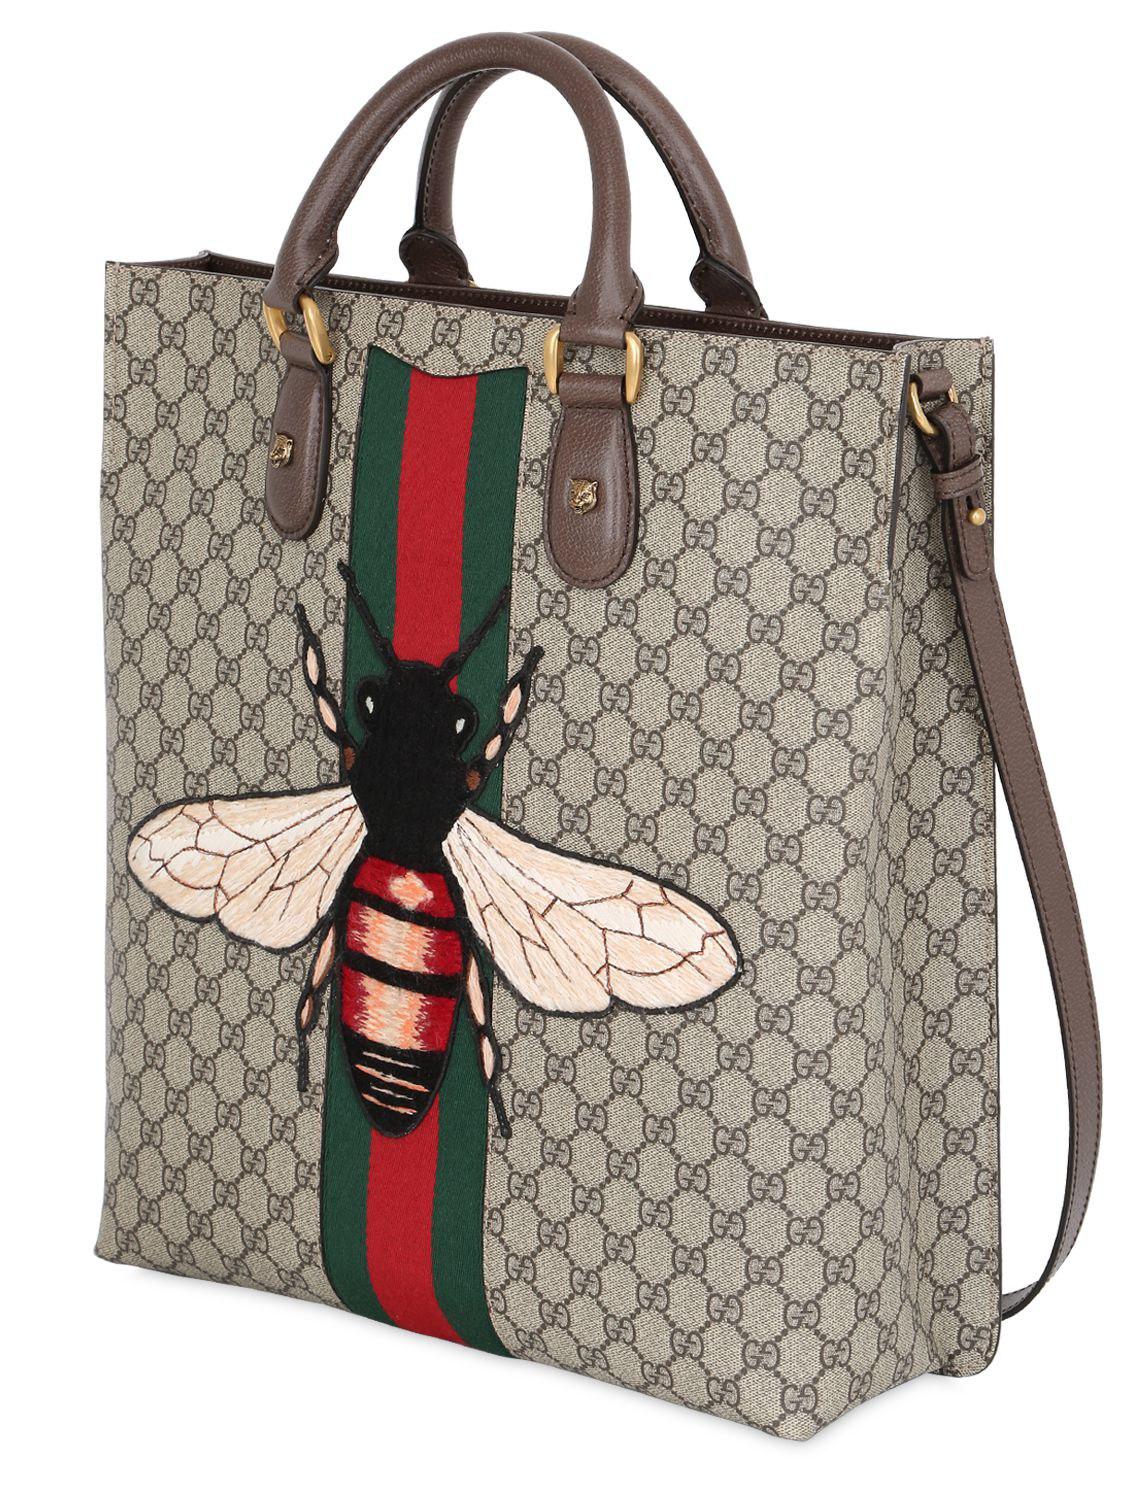 gucci tote bag bee \u003e Up to 60% OFF 